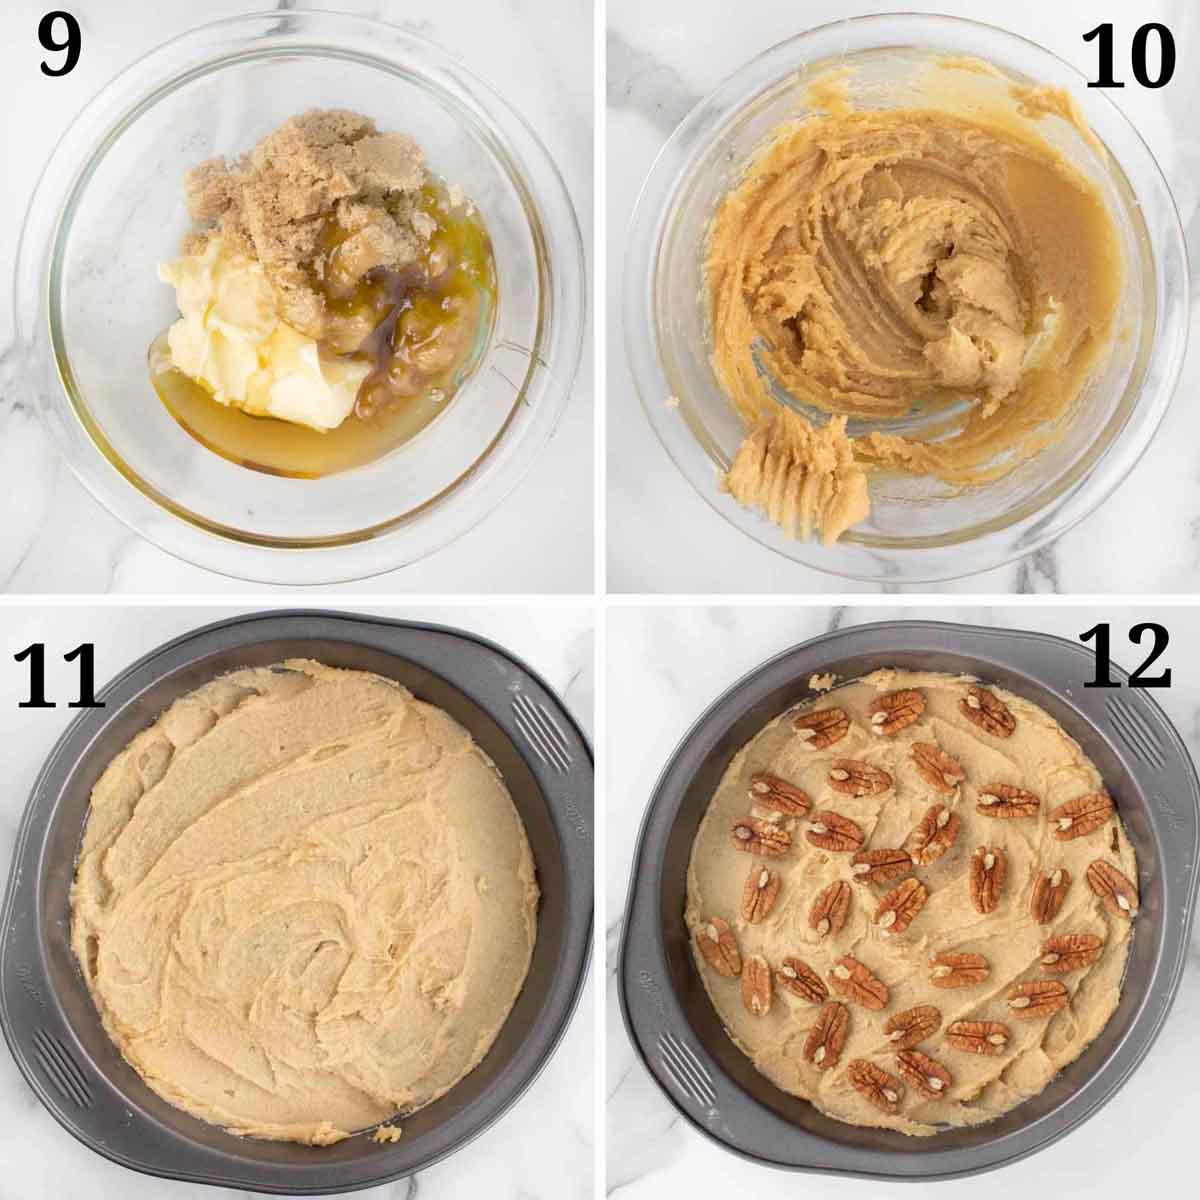 4 images showing how to make and use caramel for rolls